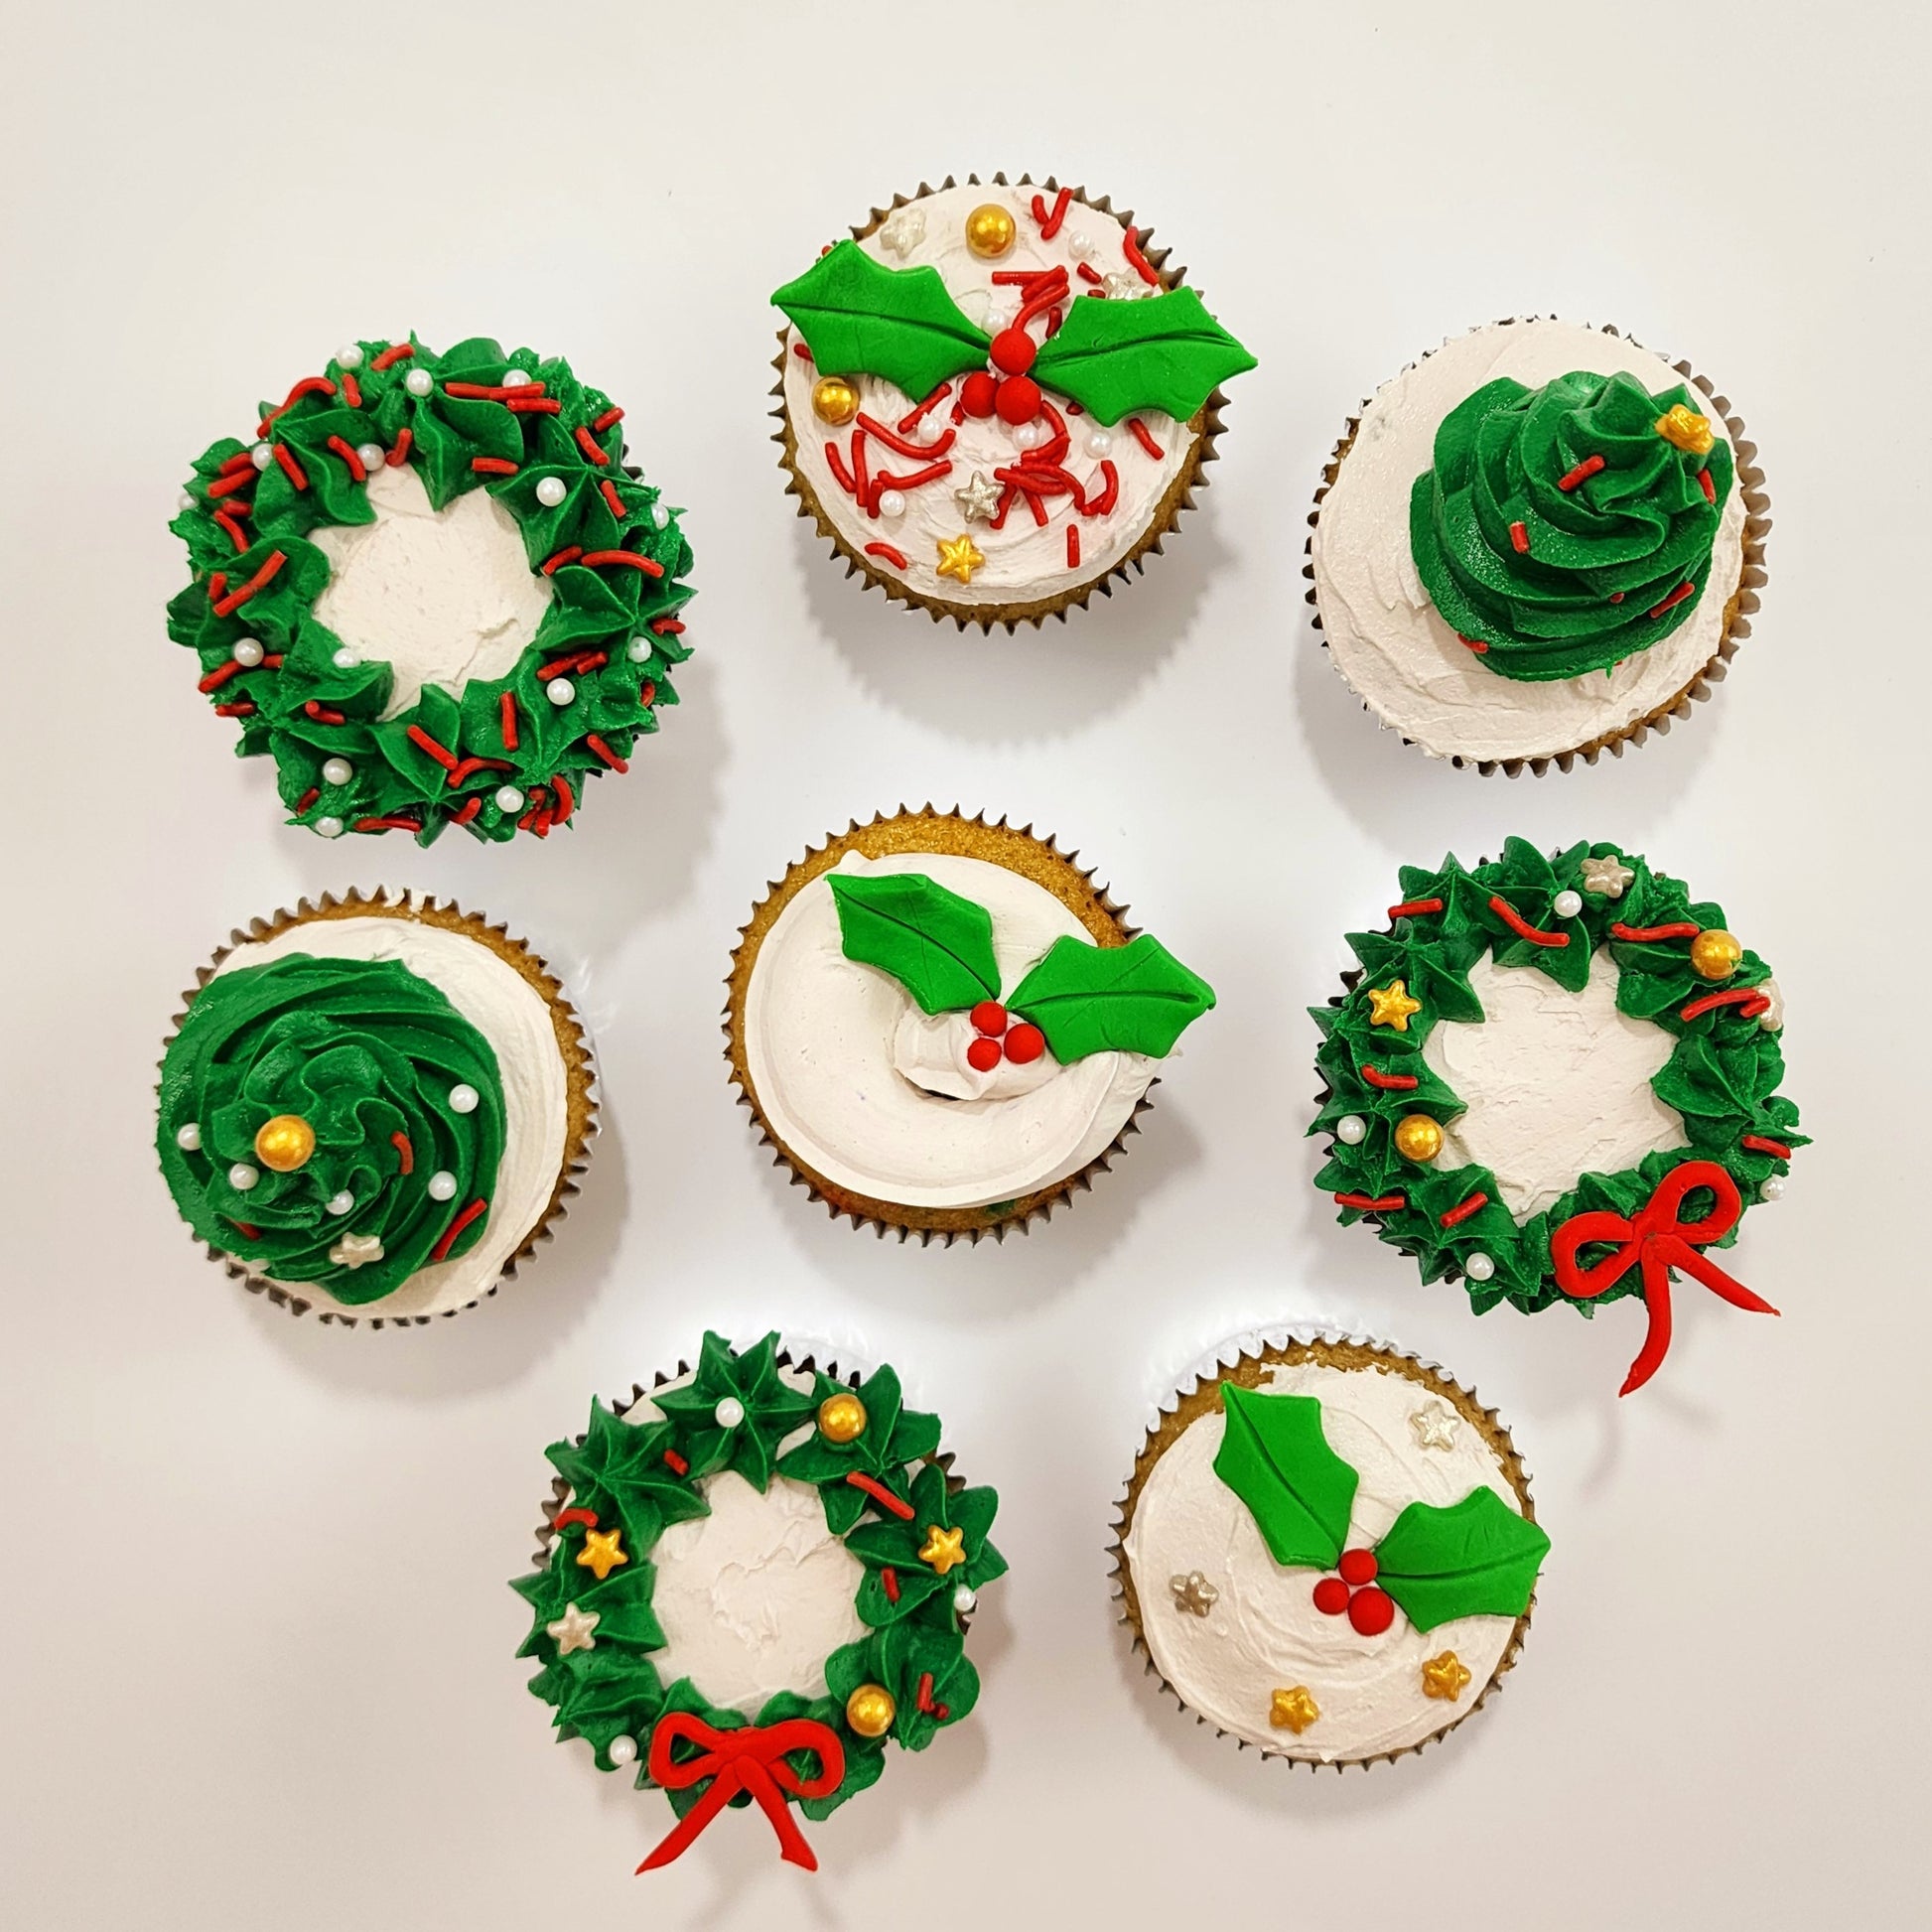 DIY cupcake decorating Christmas cupcakes with wreath and Christmas trees topping the cupcakes. Fondant holly leaves and gold, silver, and red sprinkles.